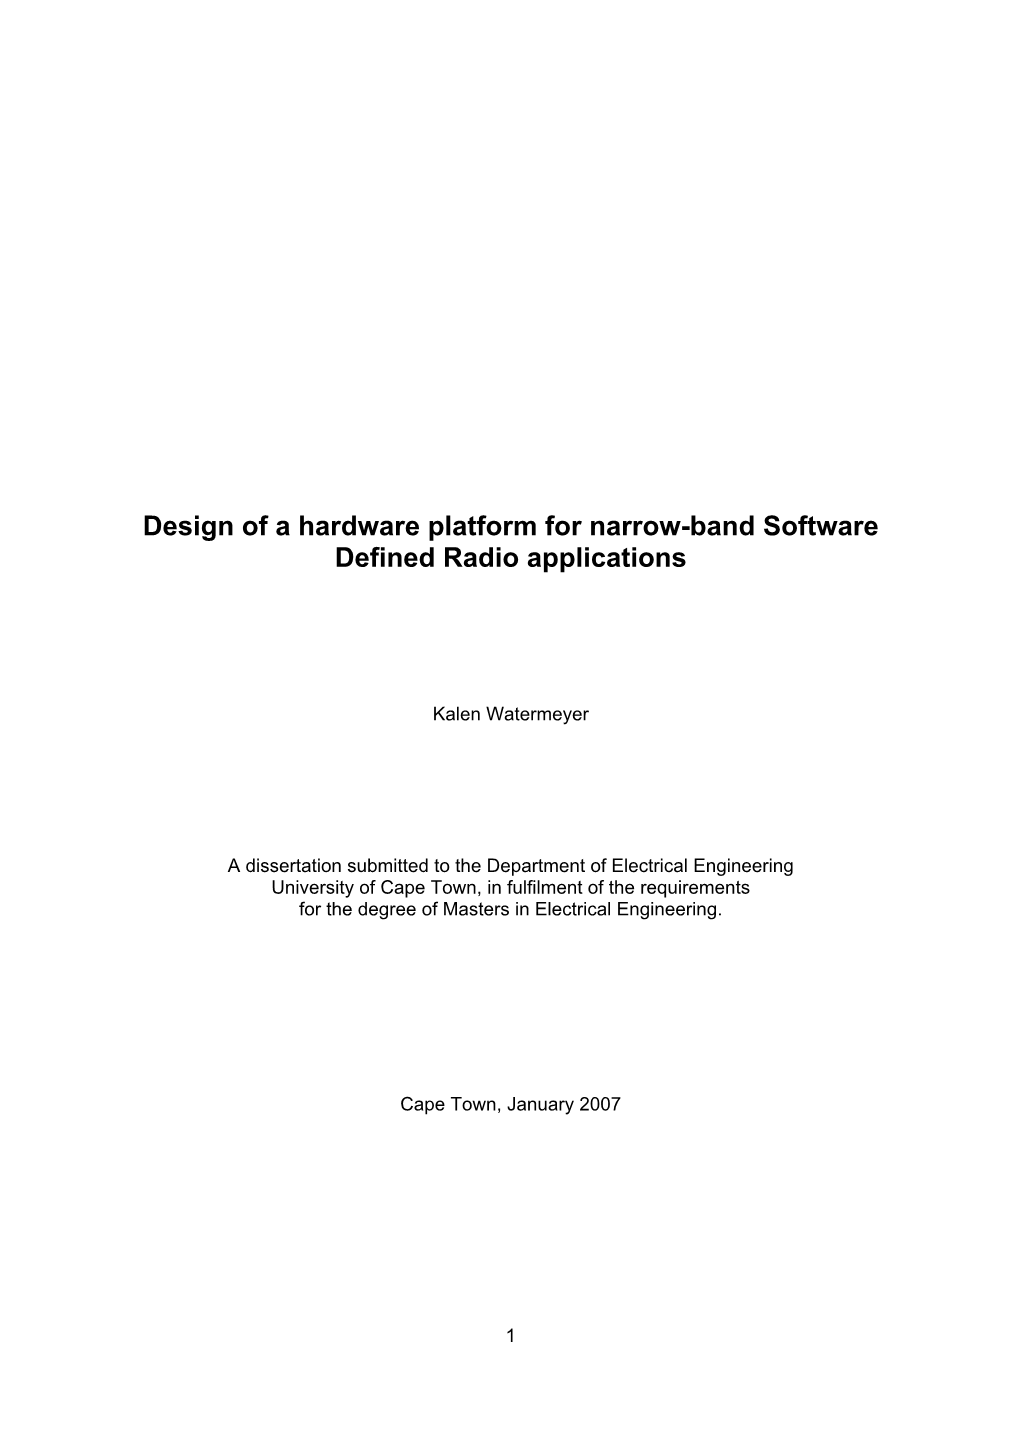 Design of a Hardware Platform for Narrow-Band Software Defined Radio Applications